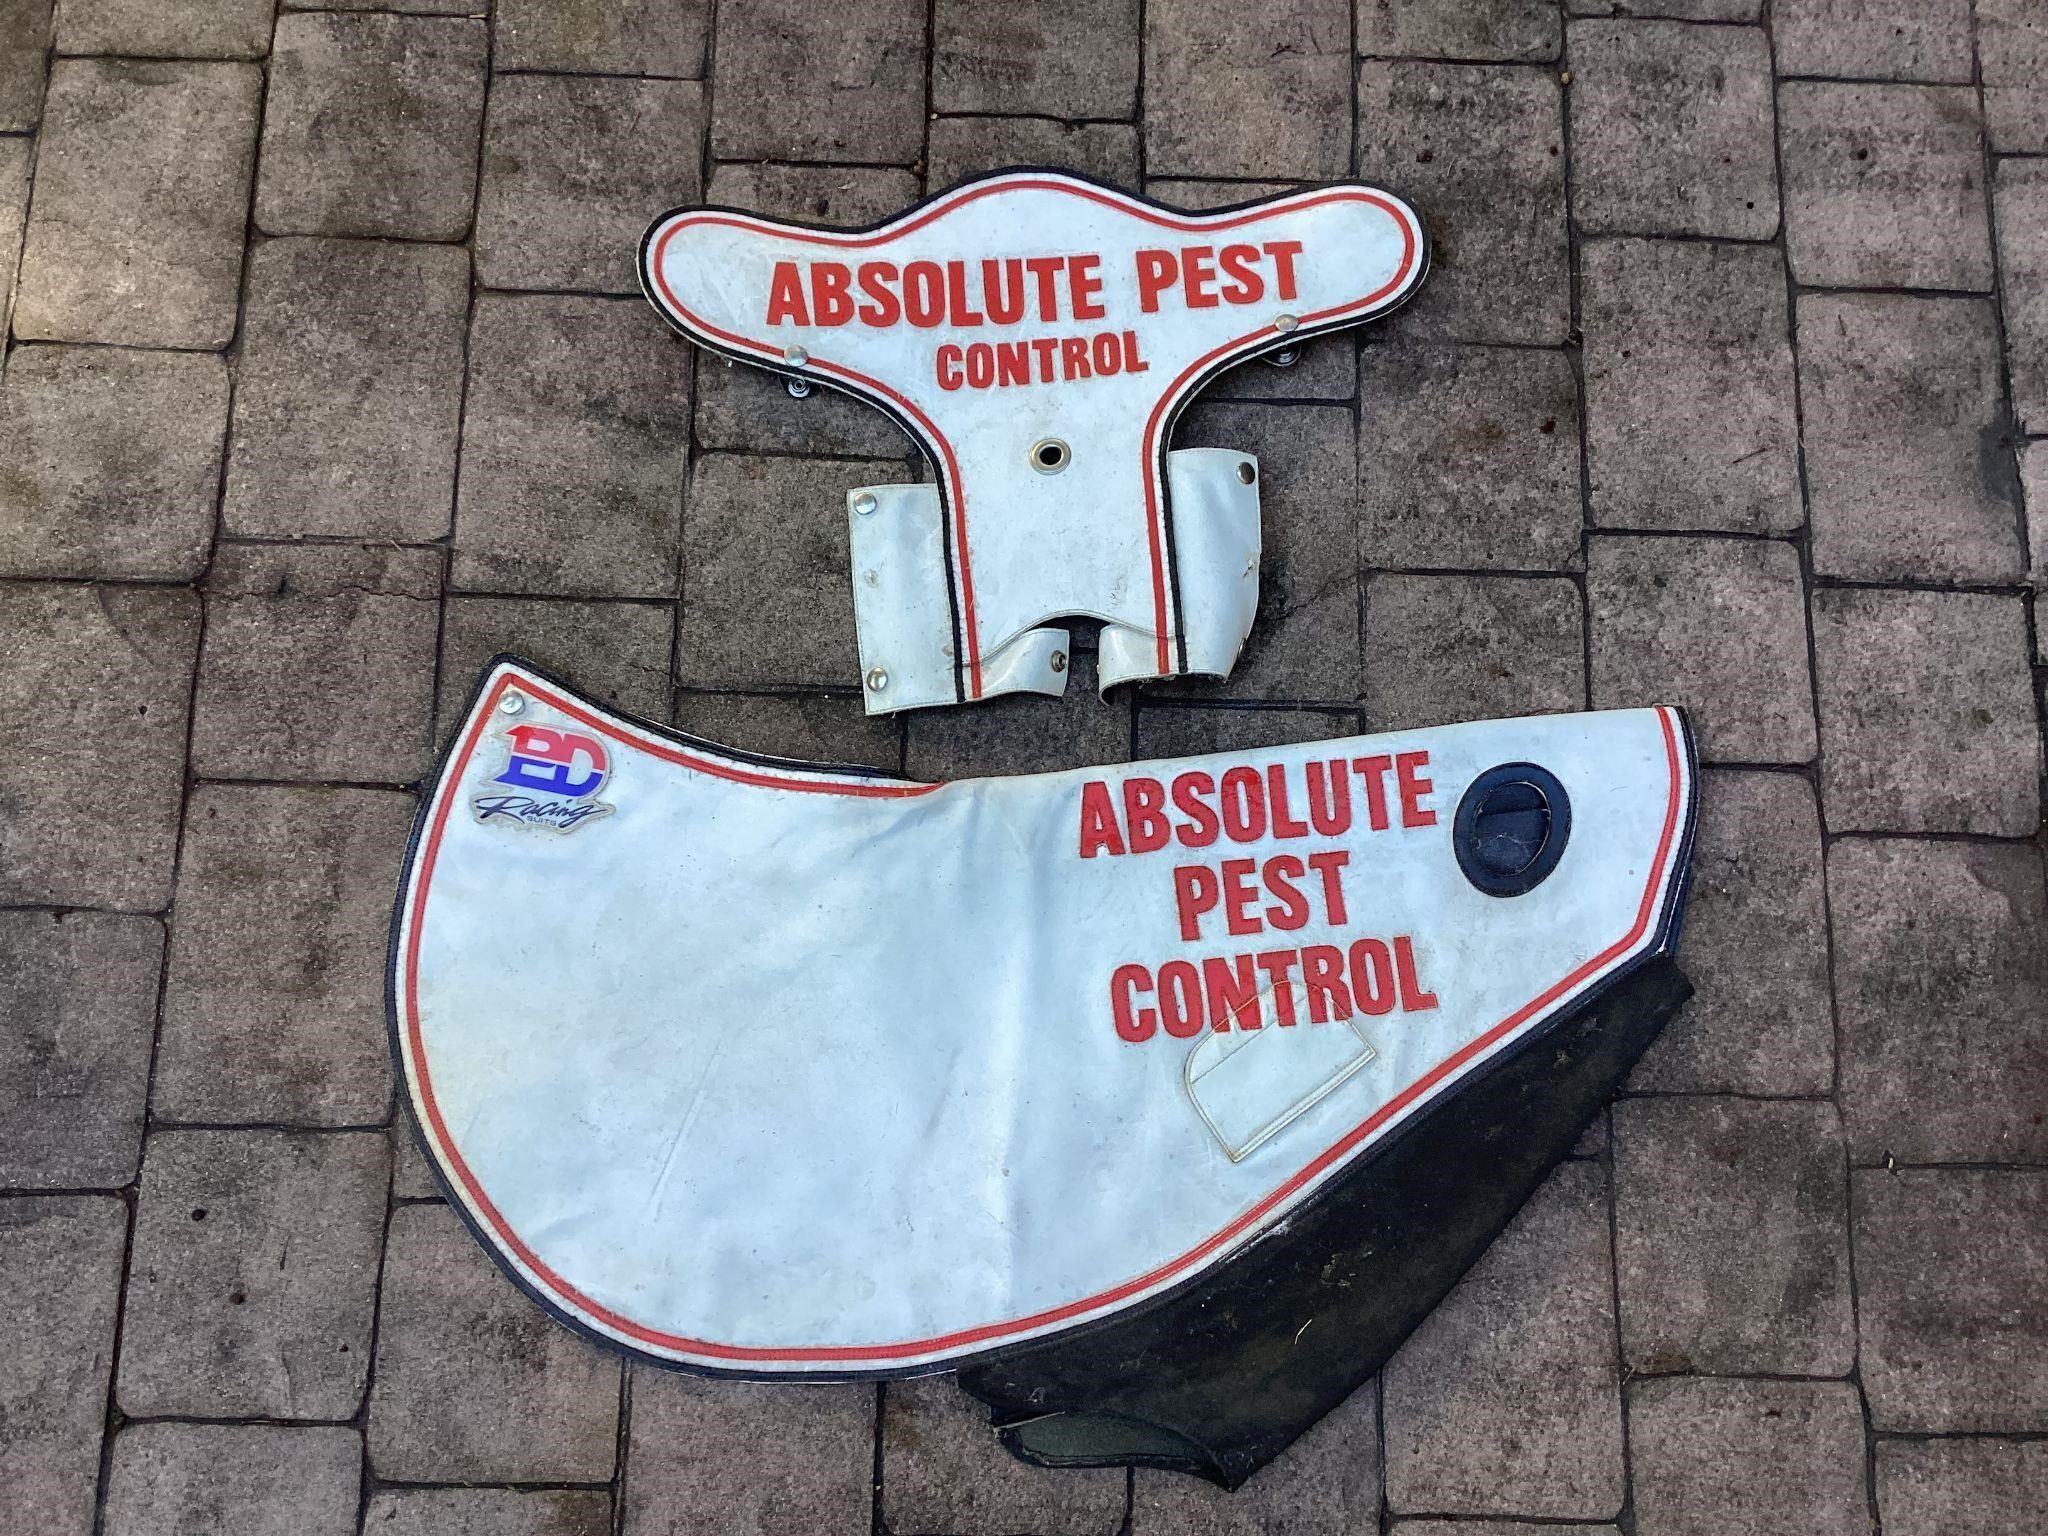 Absolute Pest Control Fork & Bike Covers